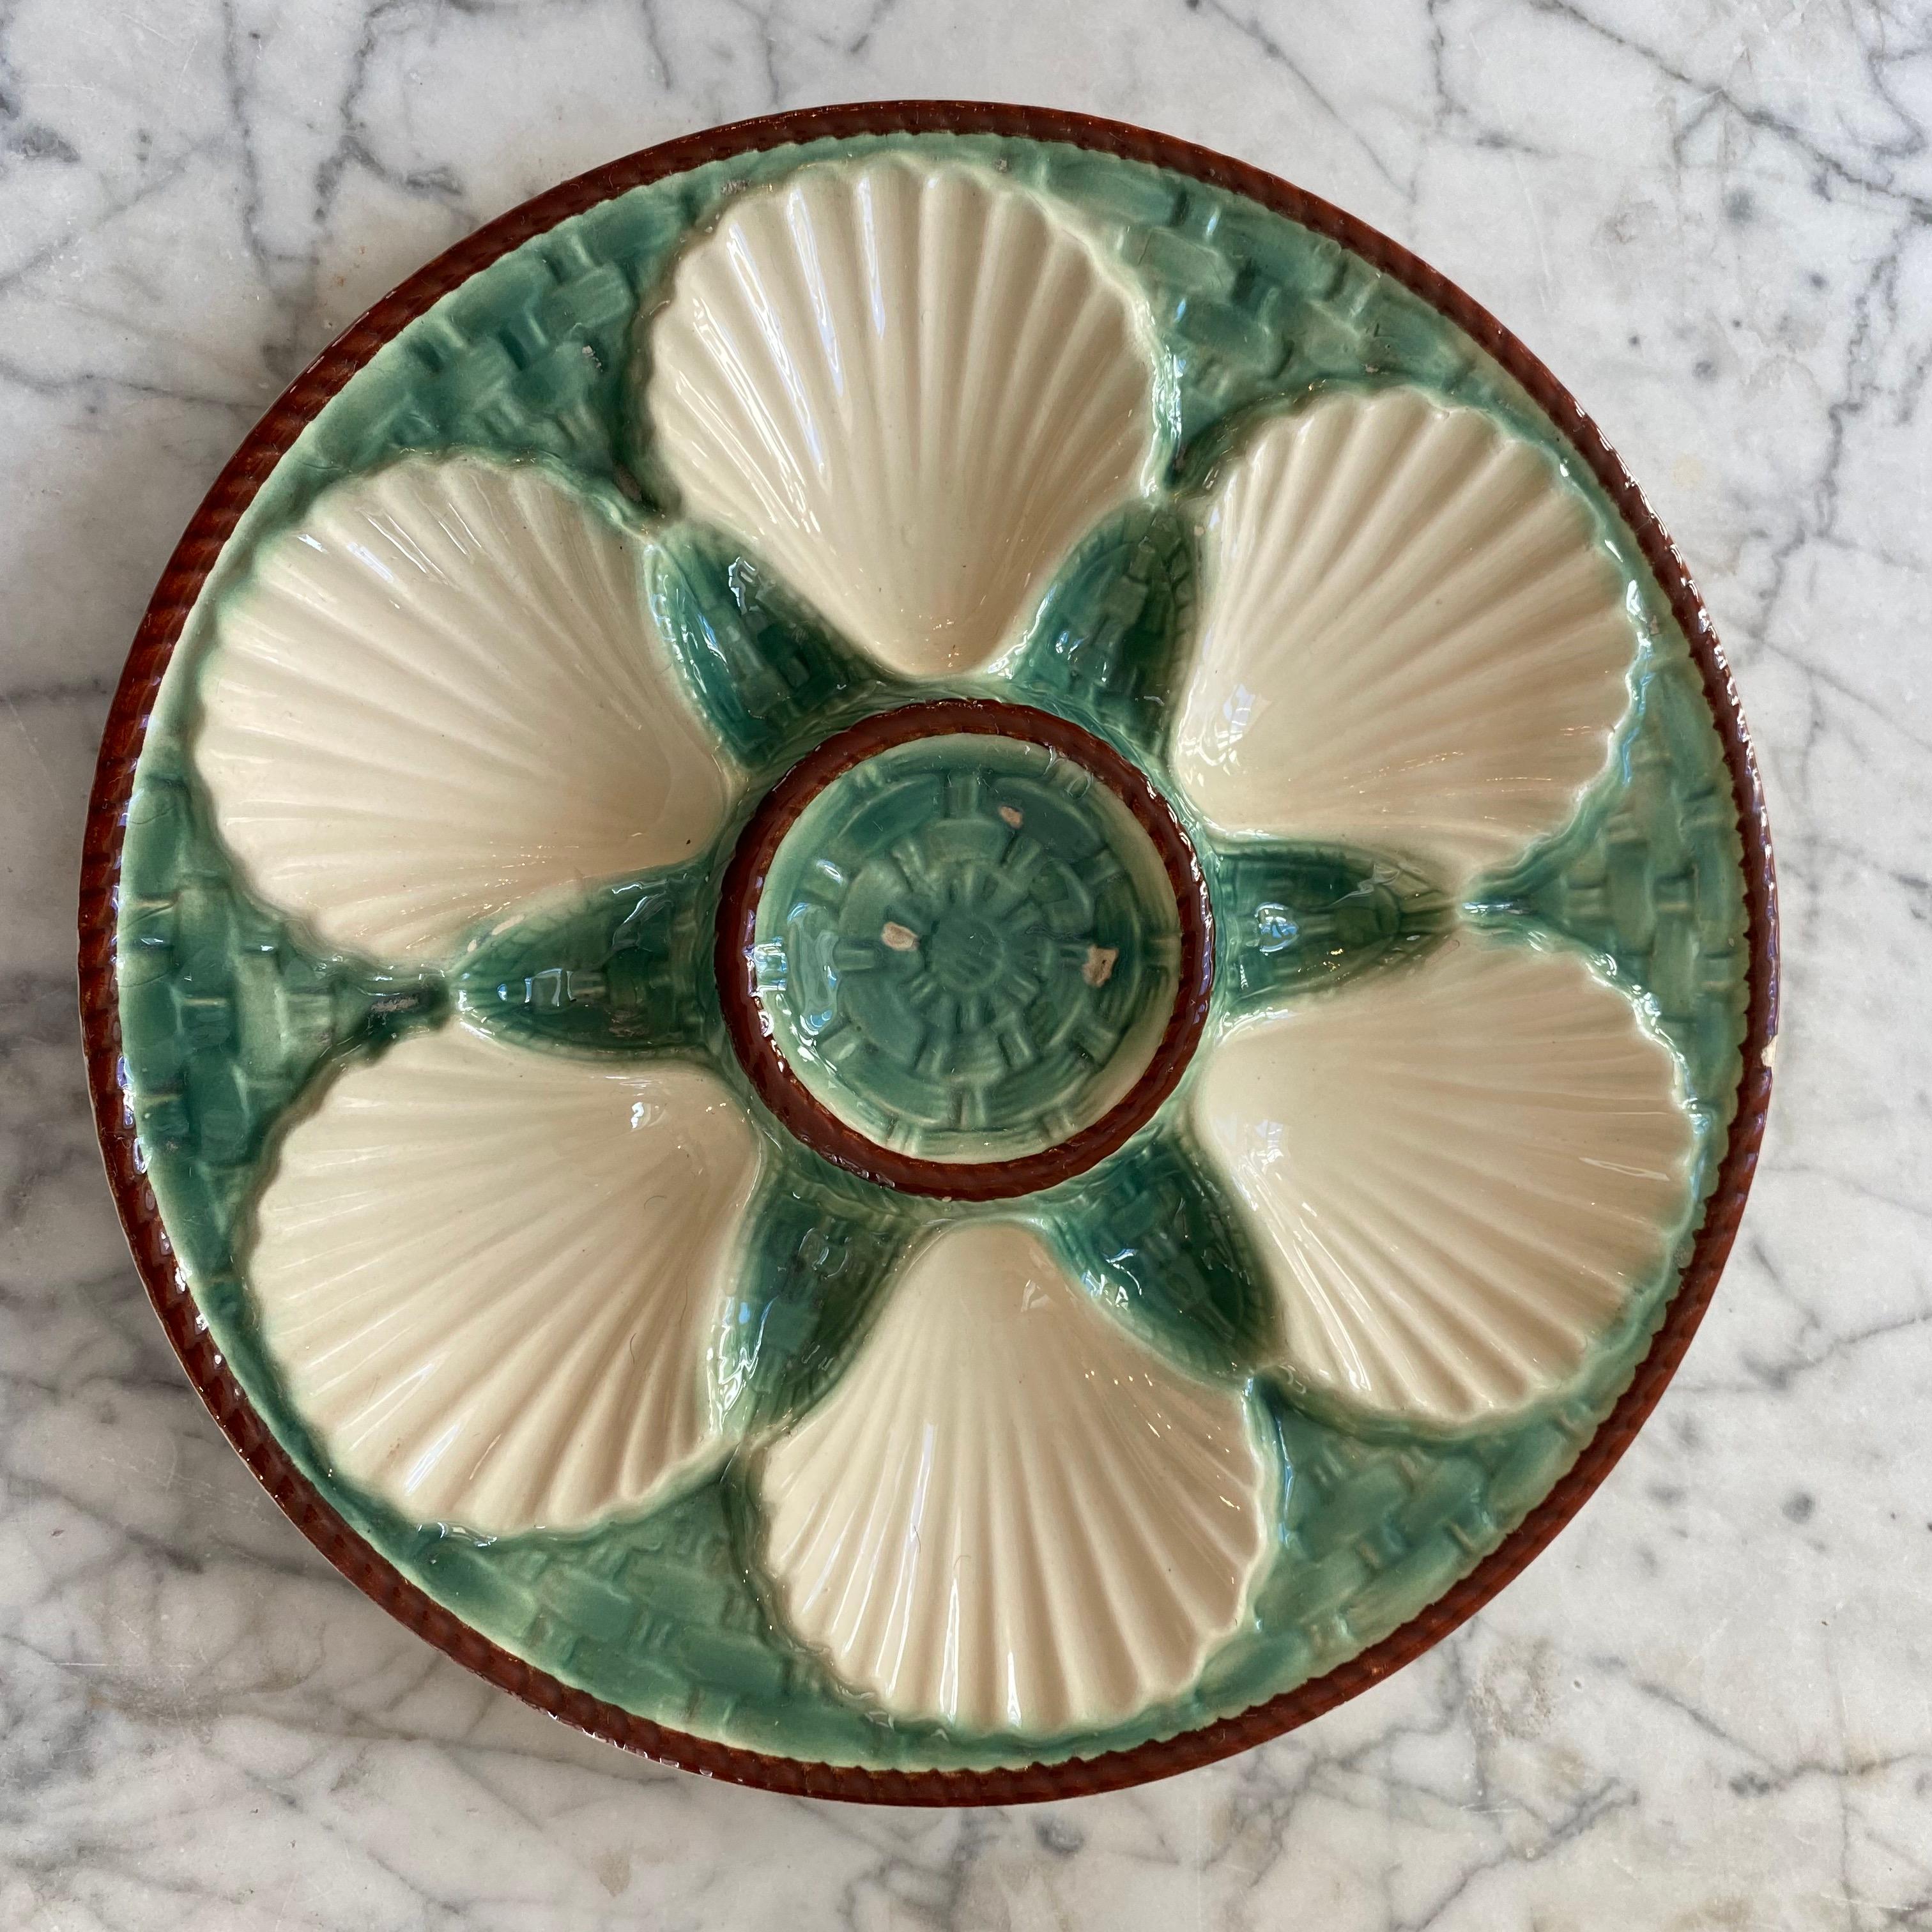 Lovely French Majolica oyster plates, circa 1890. Unsigned. Great detail and green and cream color pallet with brown trim.